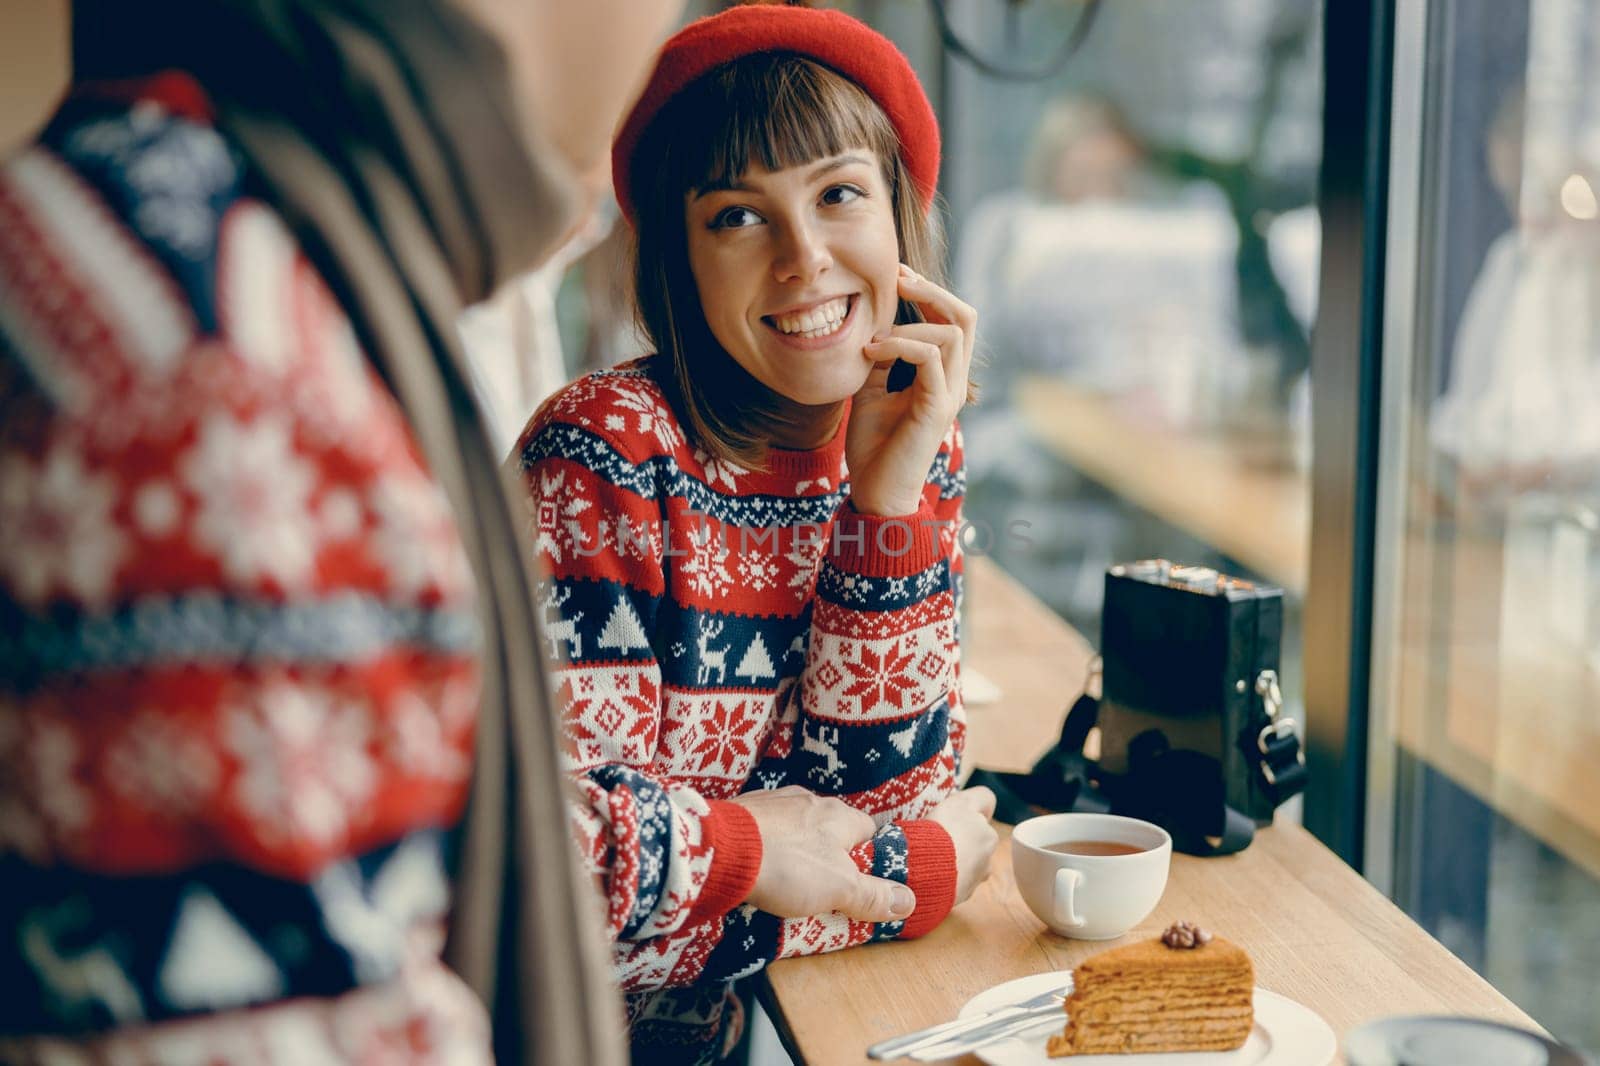 Cheerful young woman in festive sweater enjoying a coffee date at a cozy cafe by Yaroslav_astakhov